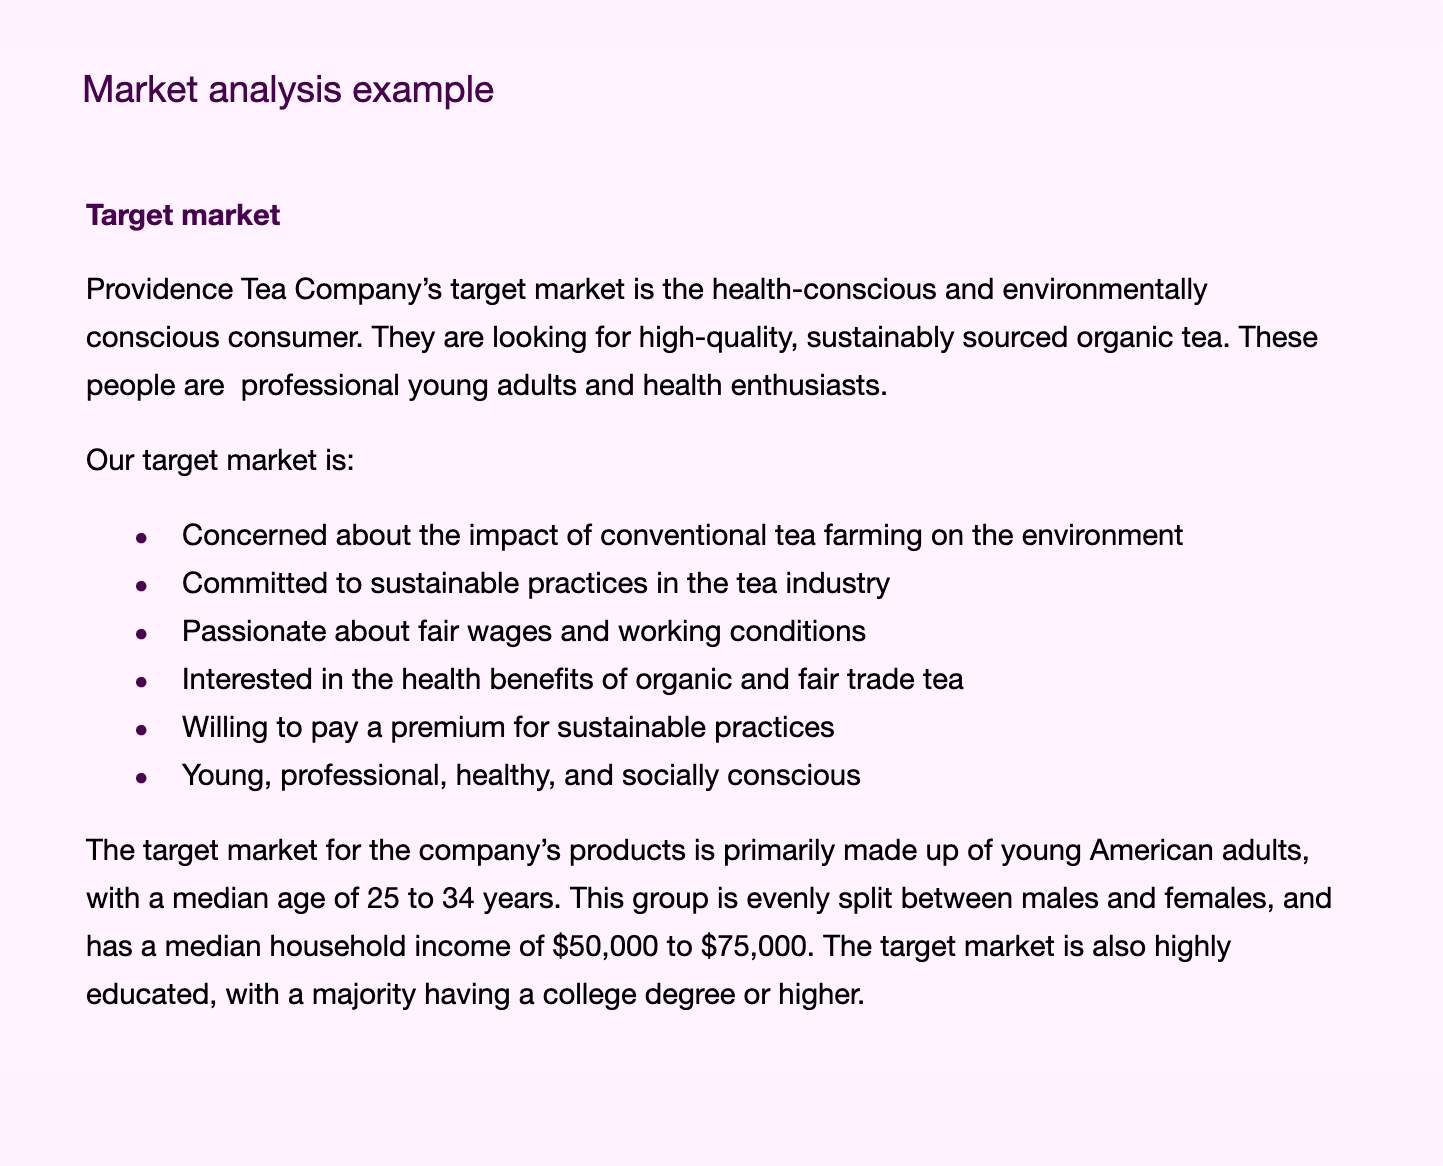 Example text in a business plan's market analysis section